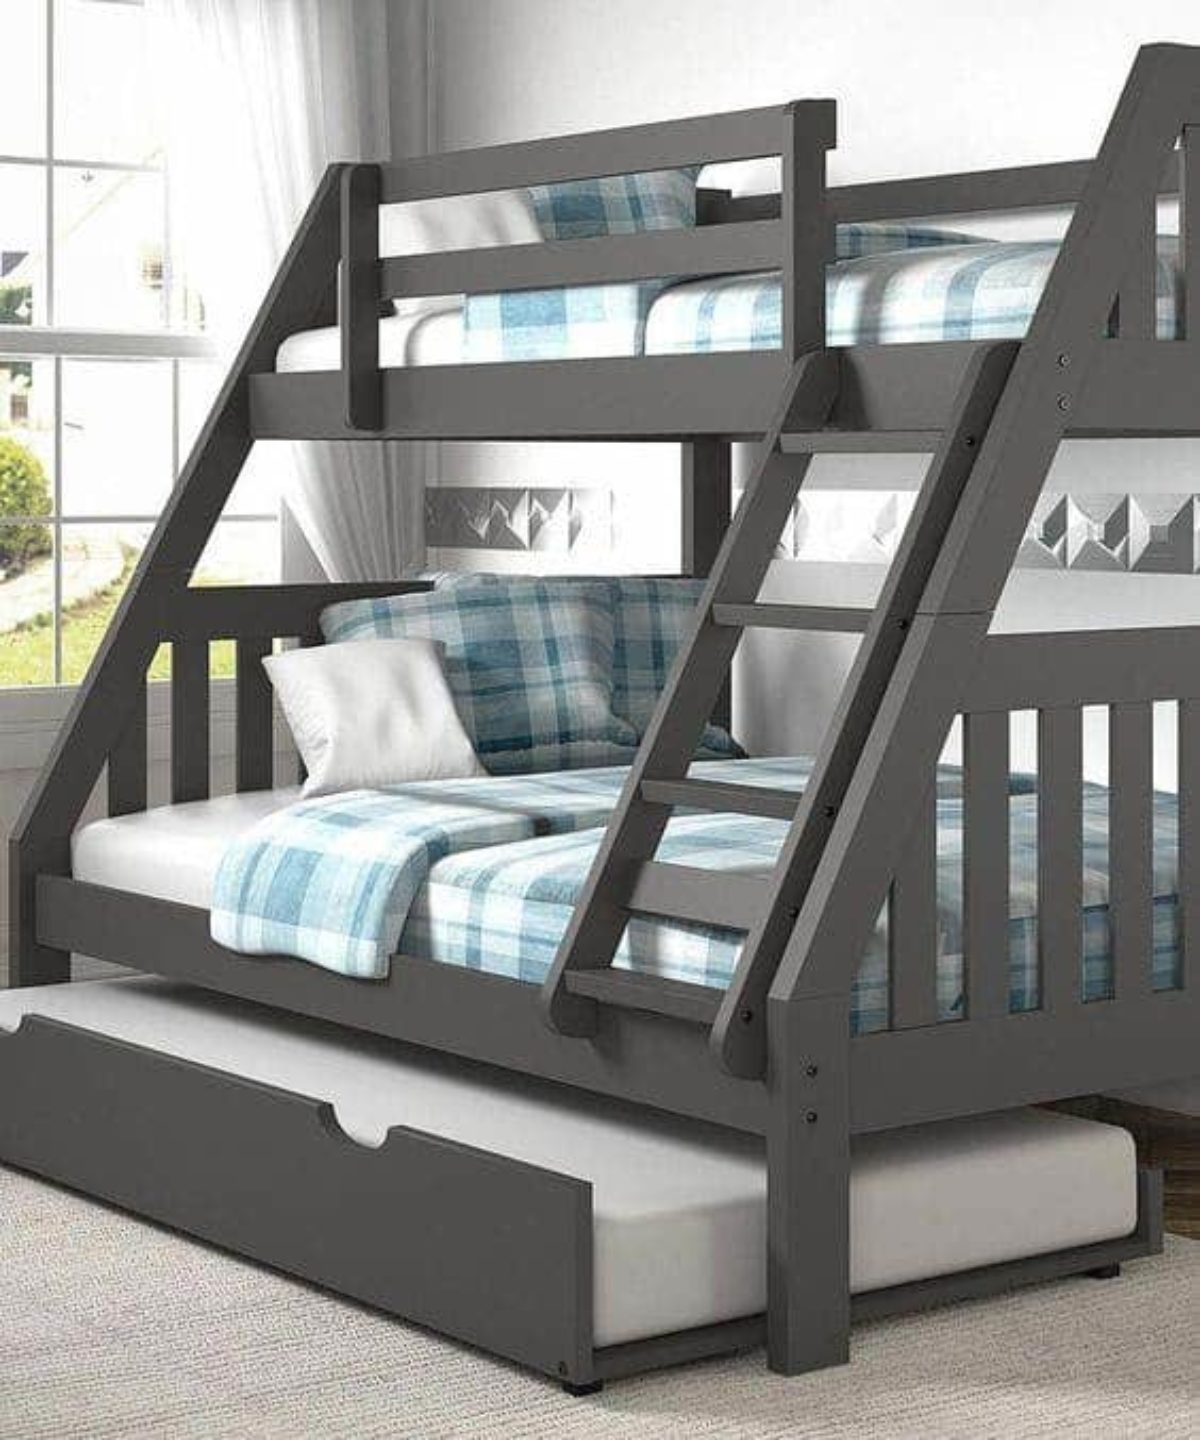 5 Steps To Make A Bunk Bed Ladder Safer, How To Build A Simple Bunk Bed Ladder